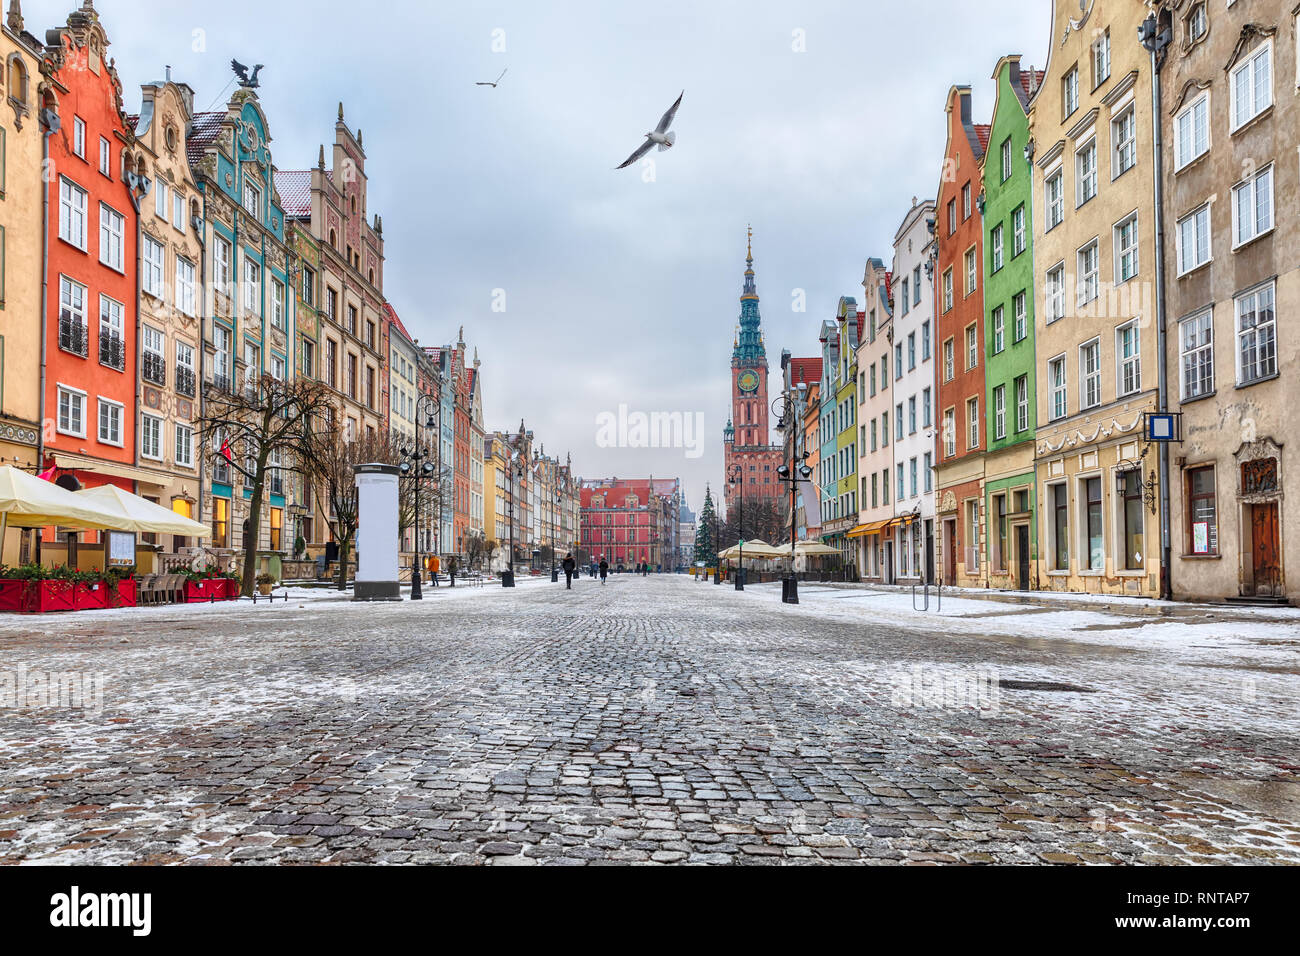 The Long Market, a famous street of Gdansk, Poland. Stock Photo